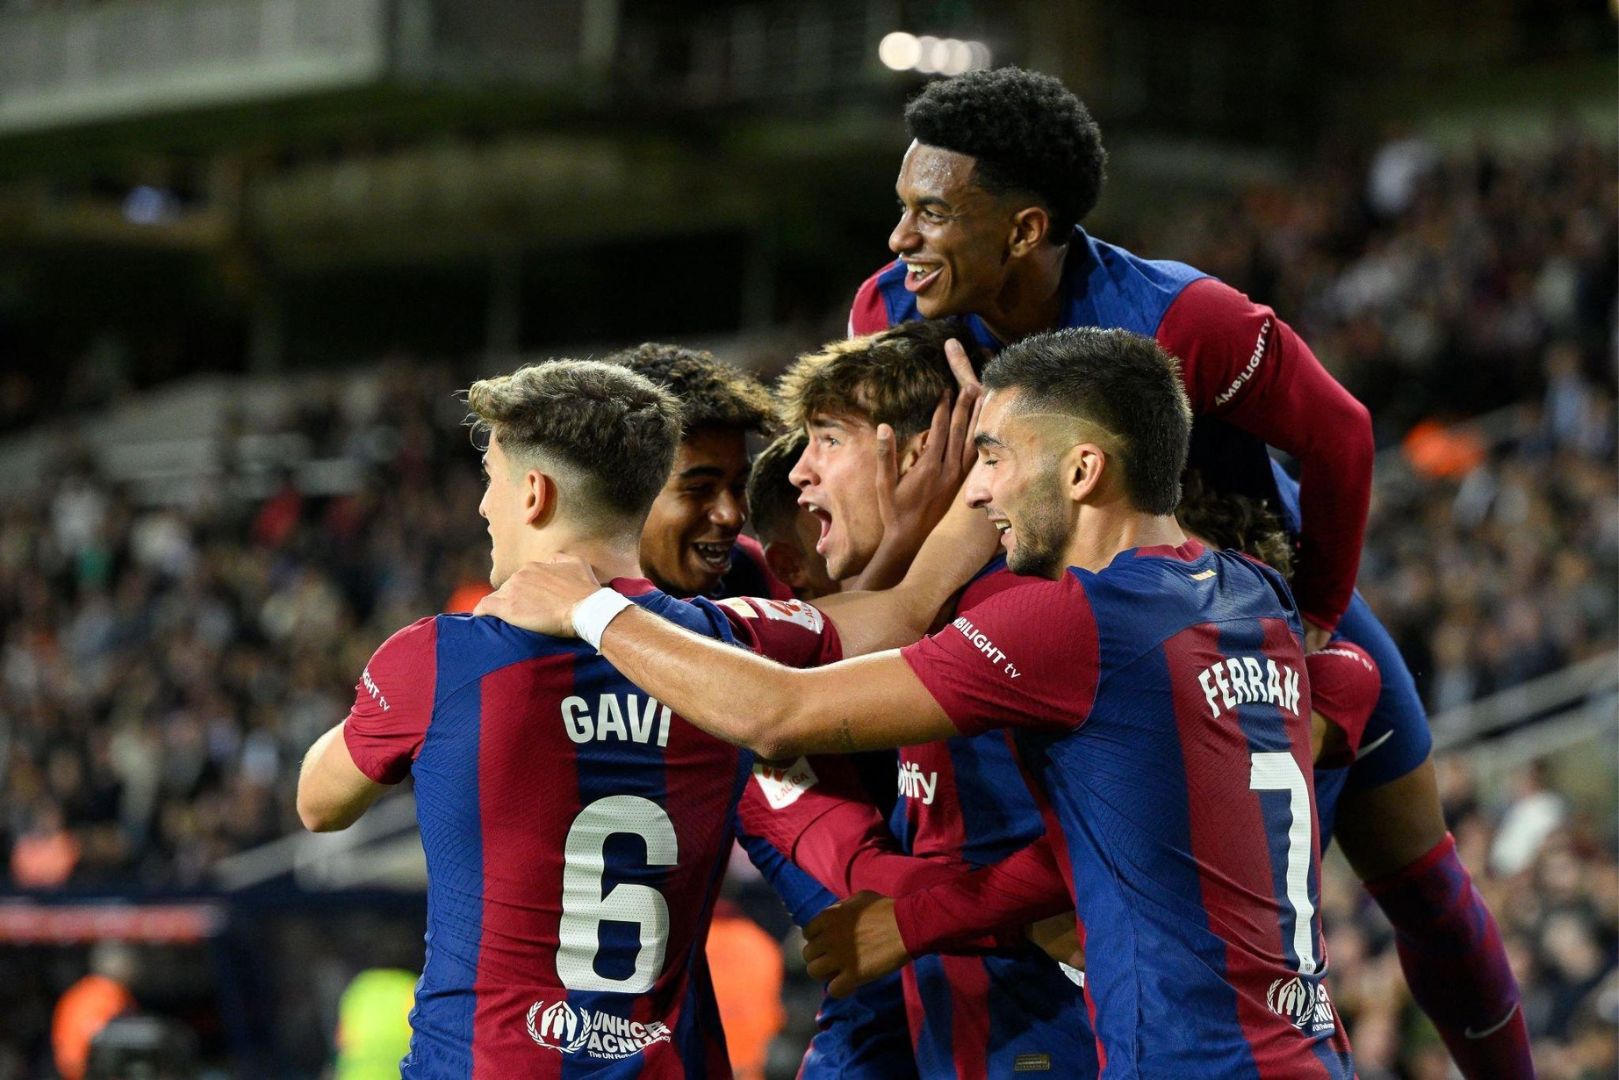 Barcelona's Spanish forward #38 Marc Guiu ( La Masia gradudate ) celebrates with teammates after scoring his team's first goal during the Spanish league football match between FC Barcelona and Athletic Club Bilbao at the Estadi Olimpic Lluis Companys in Barcelona on October 22, 2023.